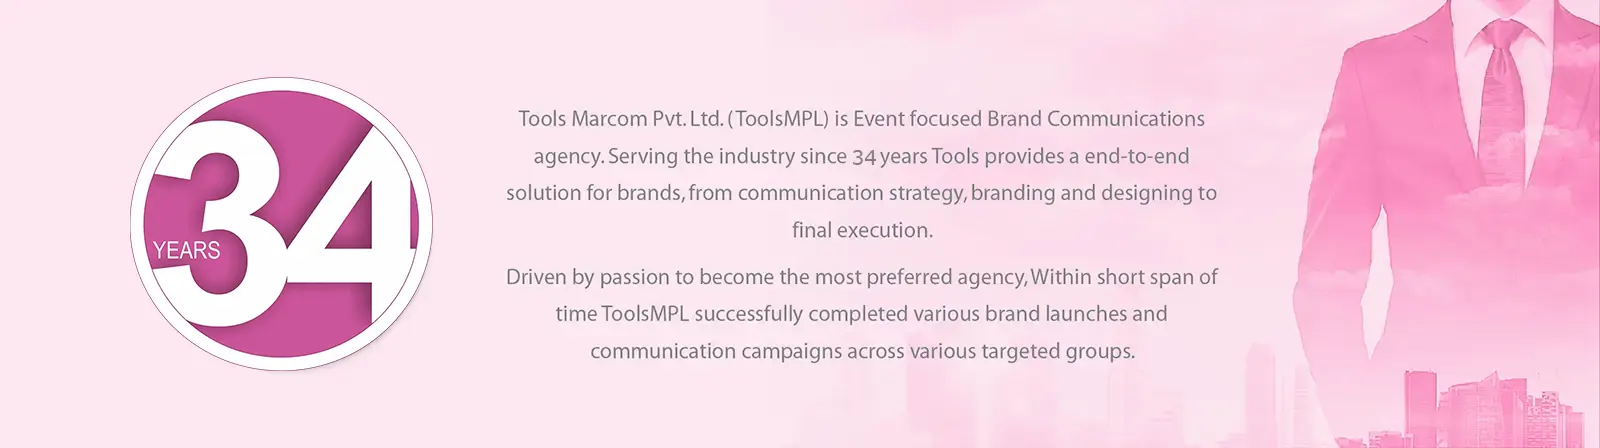 Since 34 years of Tools Marcom P Ltd,An Event focused Brand Communication agency, Best Advertising Agency in Mumbai